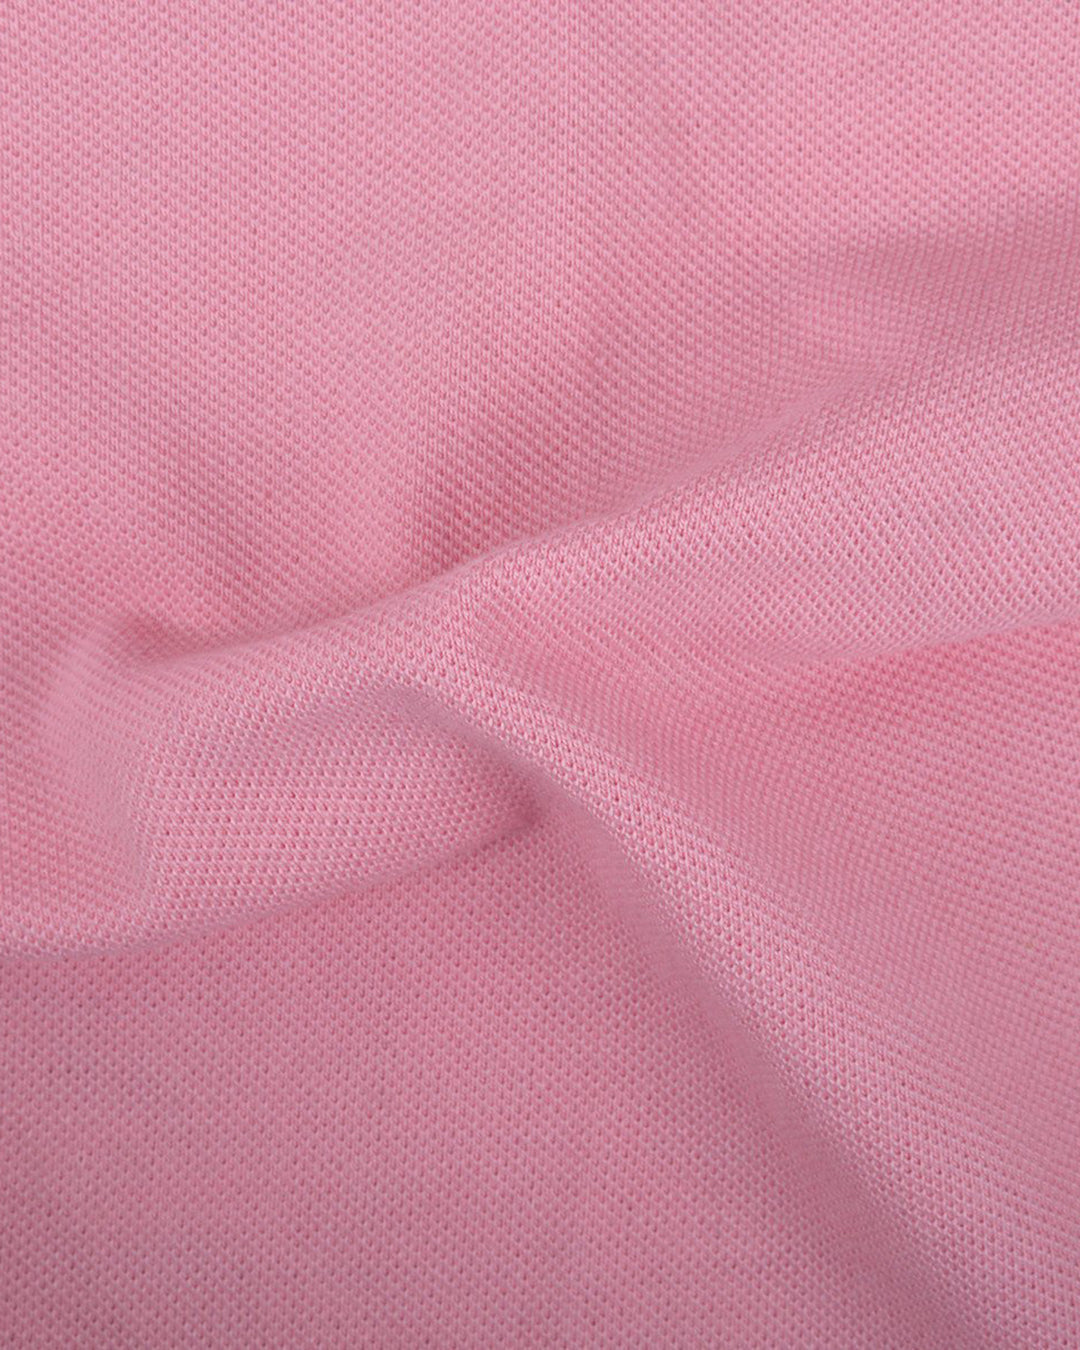 Close up of the custom oxford polo shirt for men by Luxire in mid pink